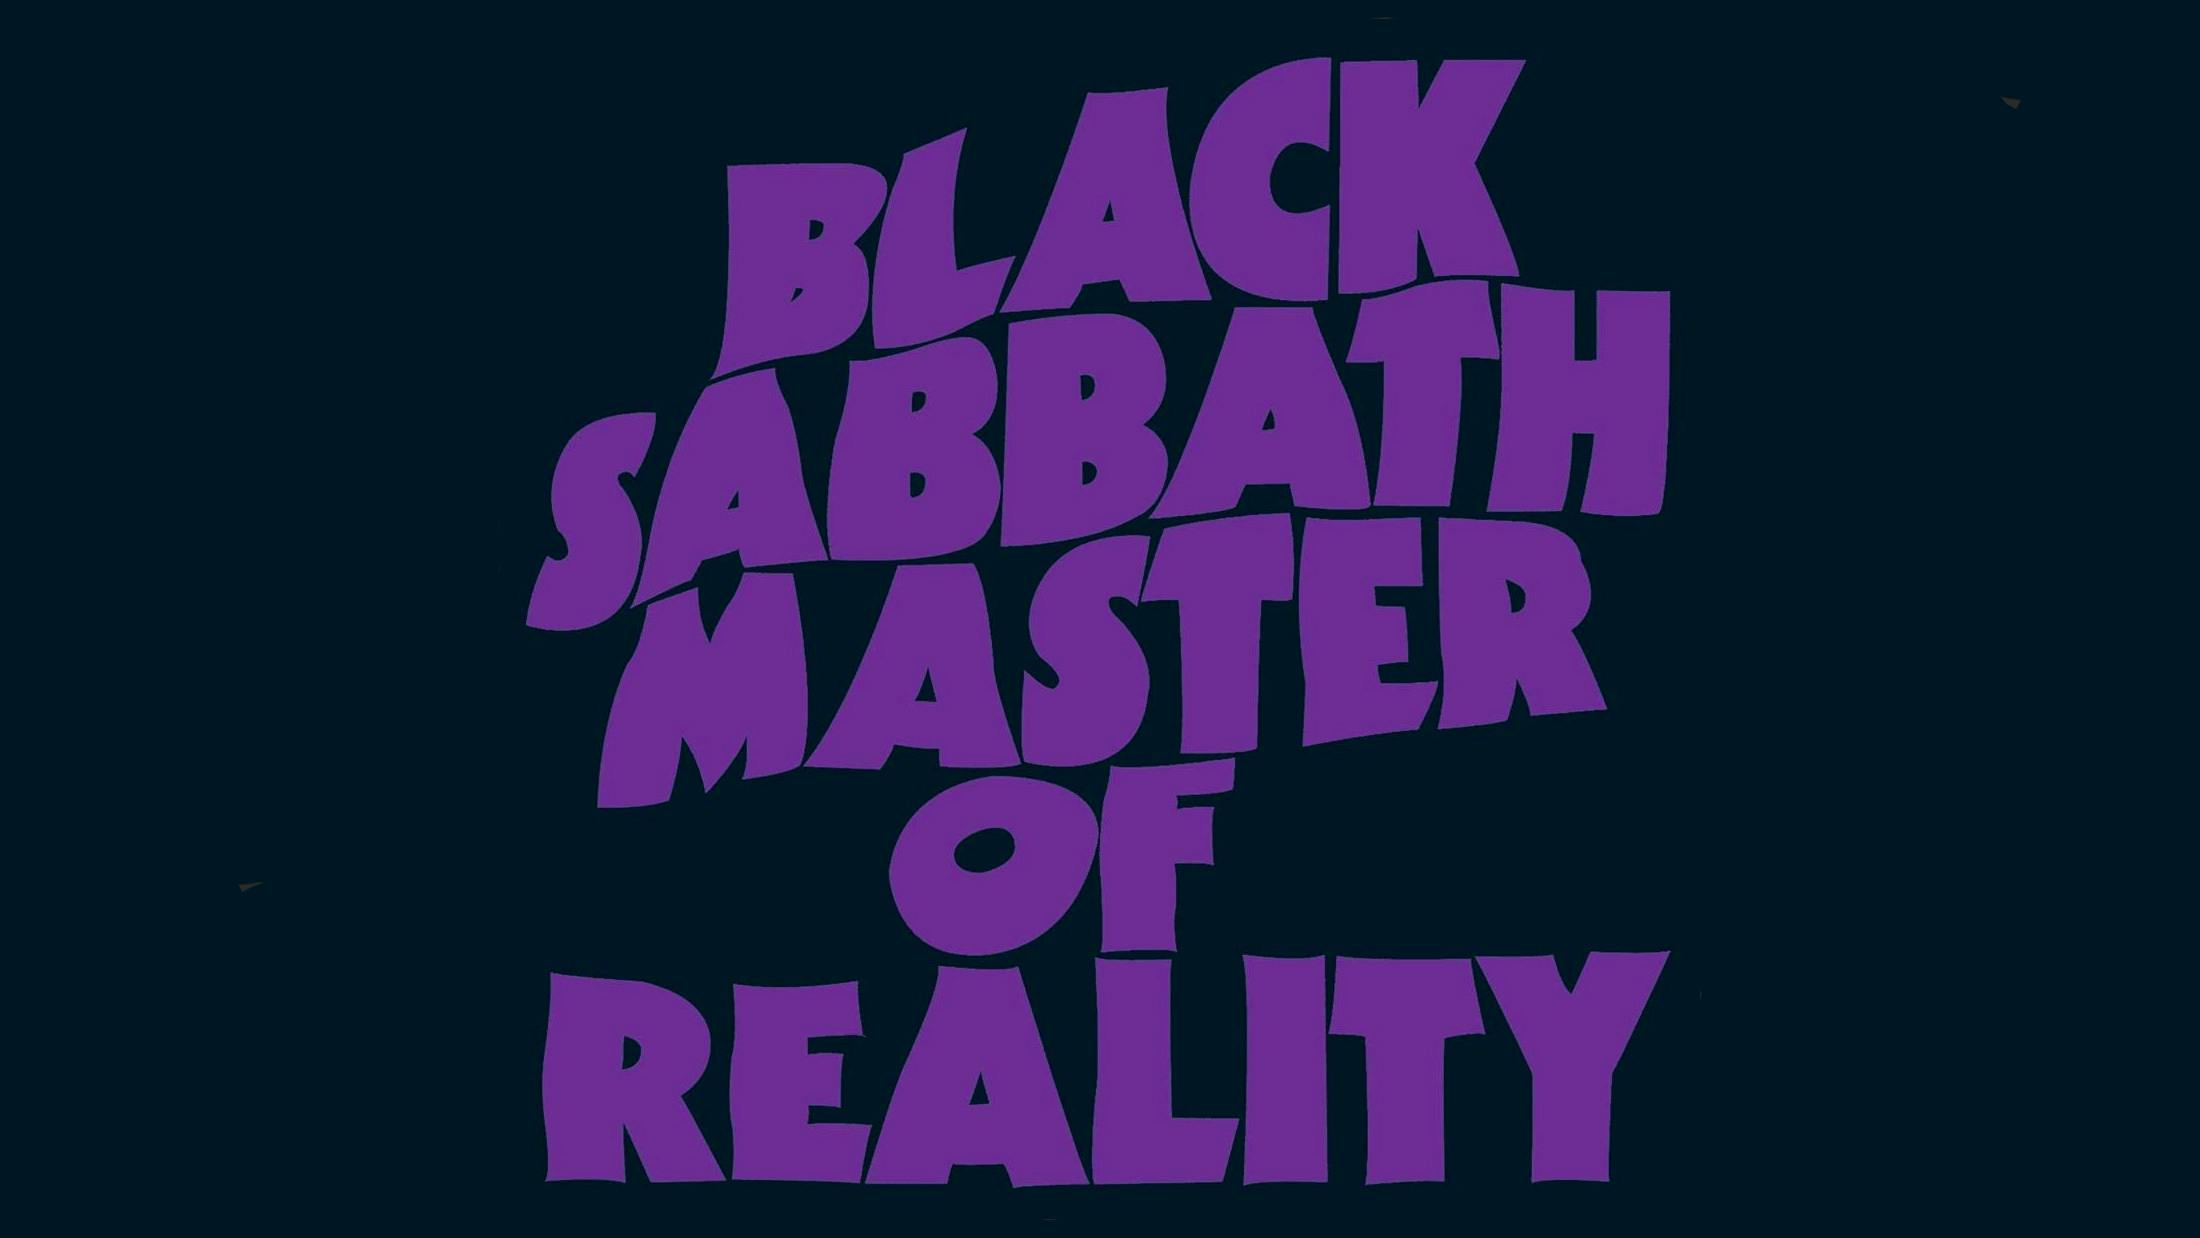 Master Of Reality is the best album about being a Black Sabbath fan